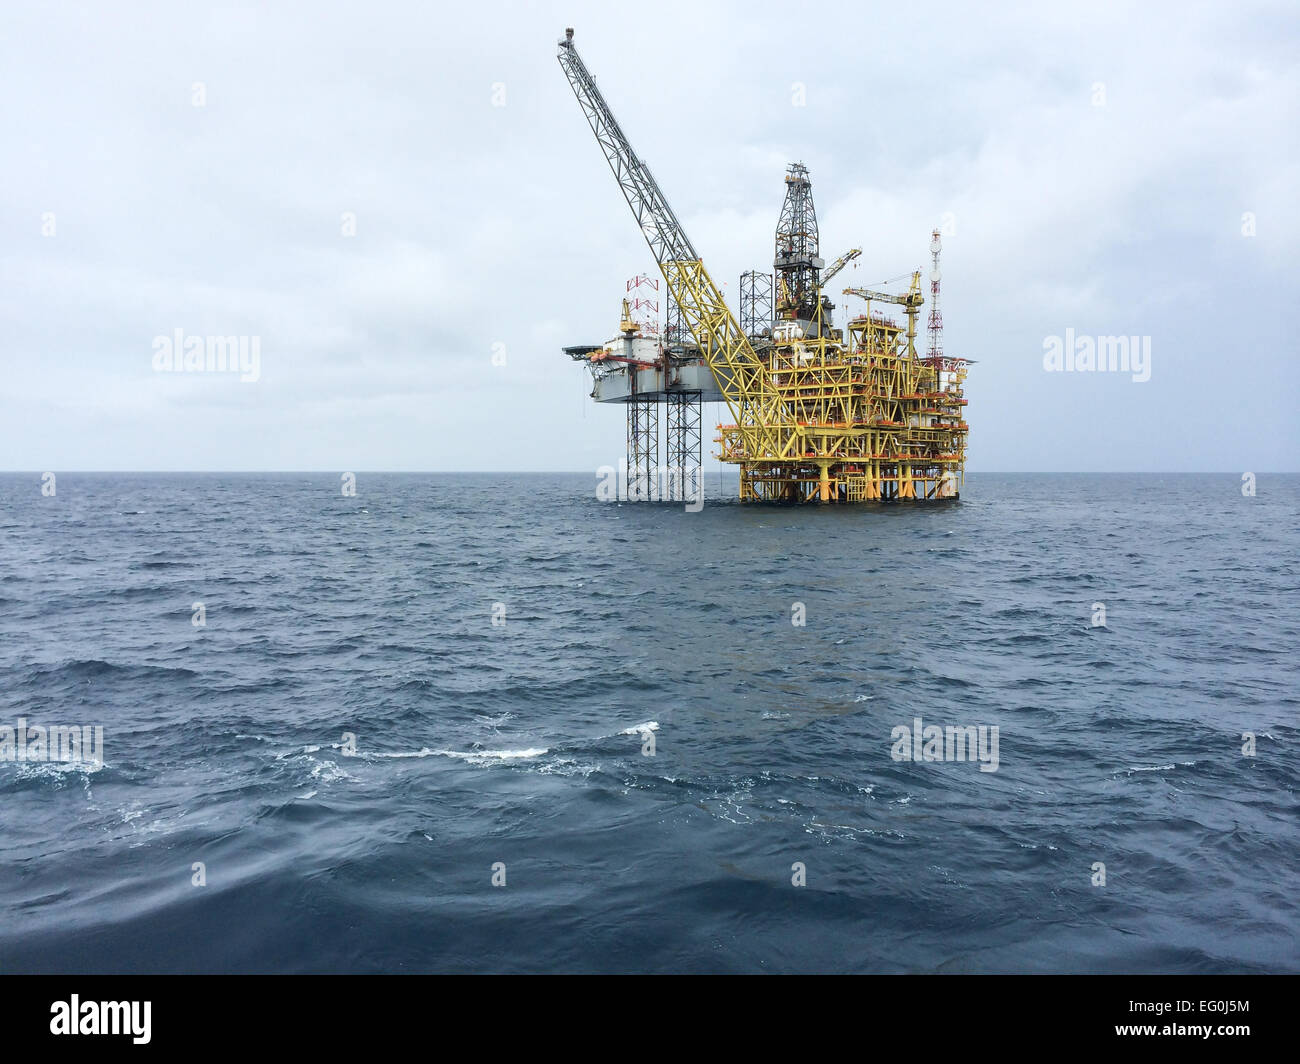 Oil and gas platform at sea Stock Photo